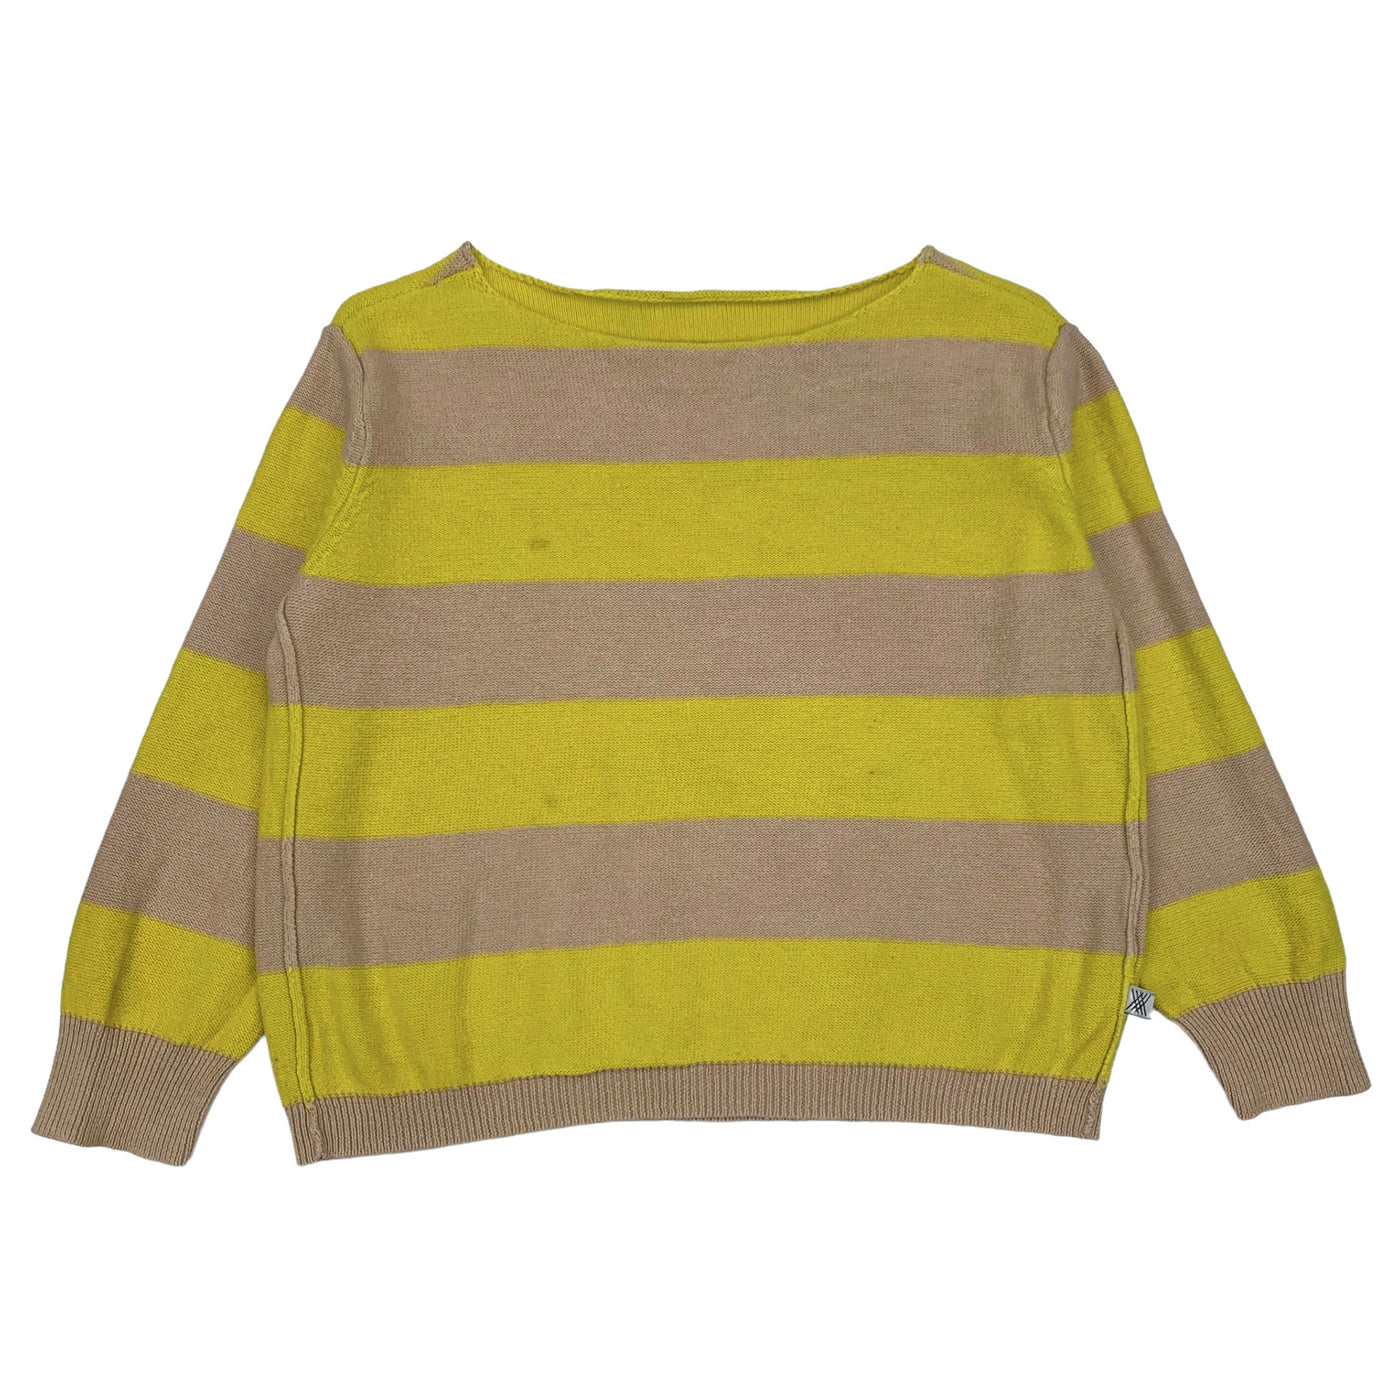 Repose AMS knitted summer sweater stripe yellow / beige size 3